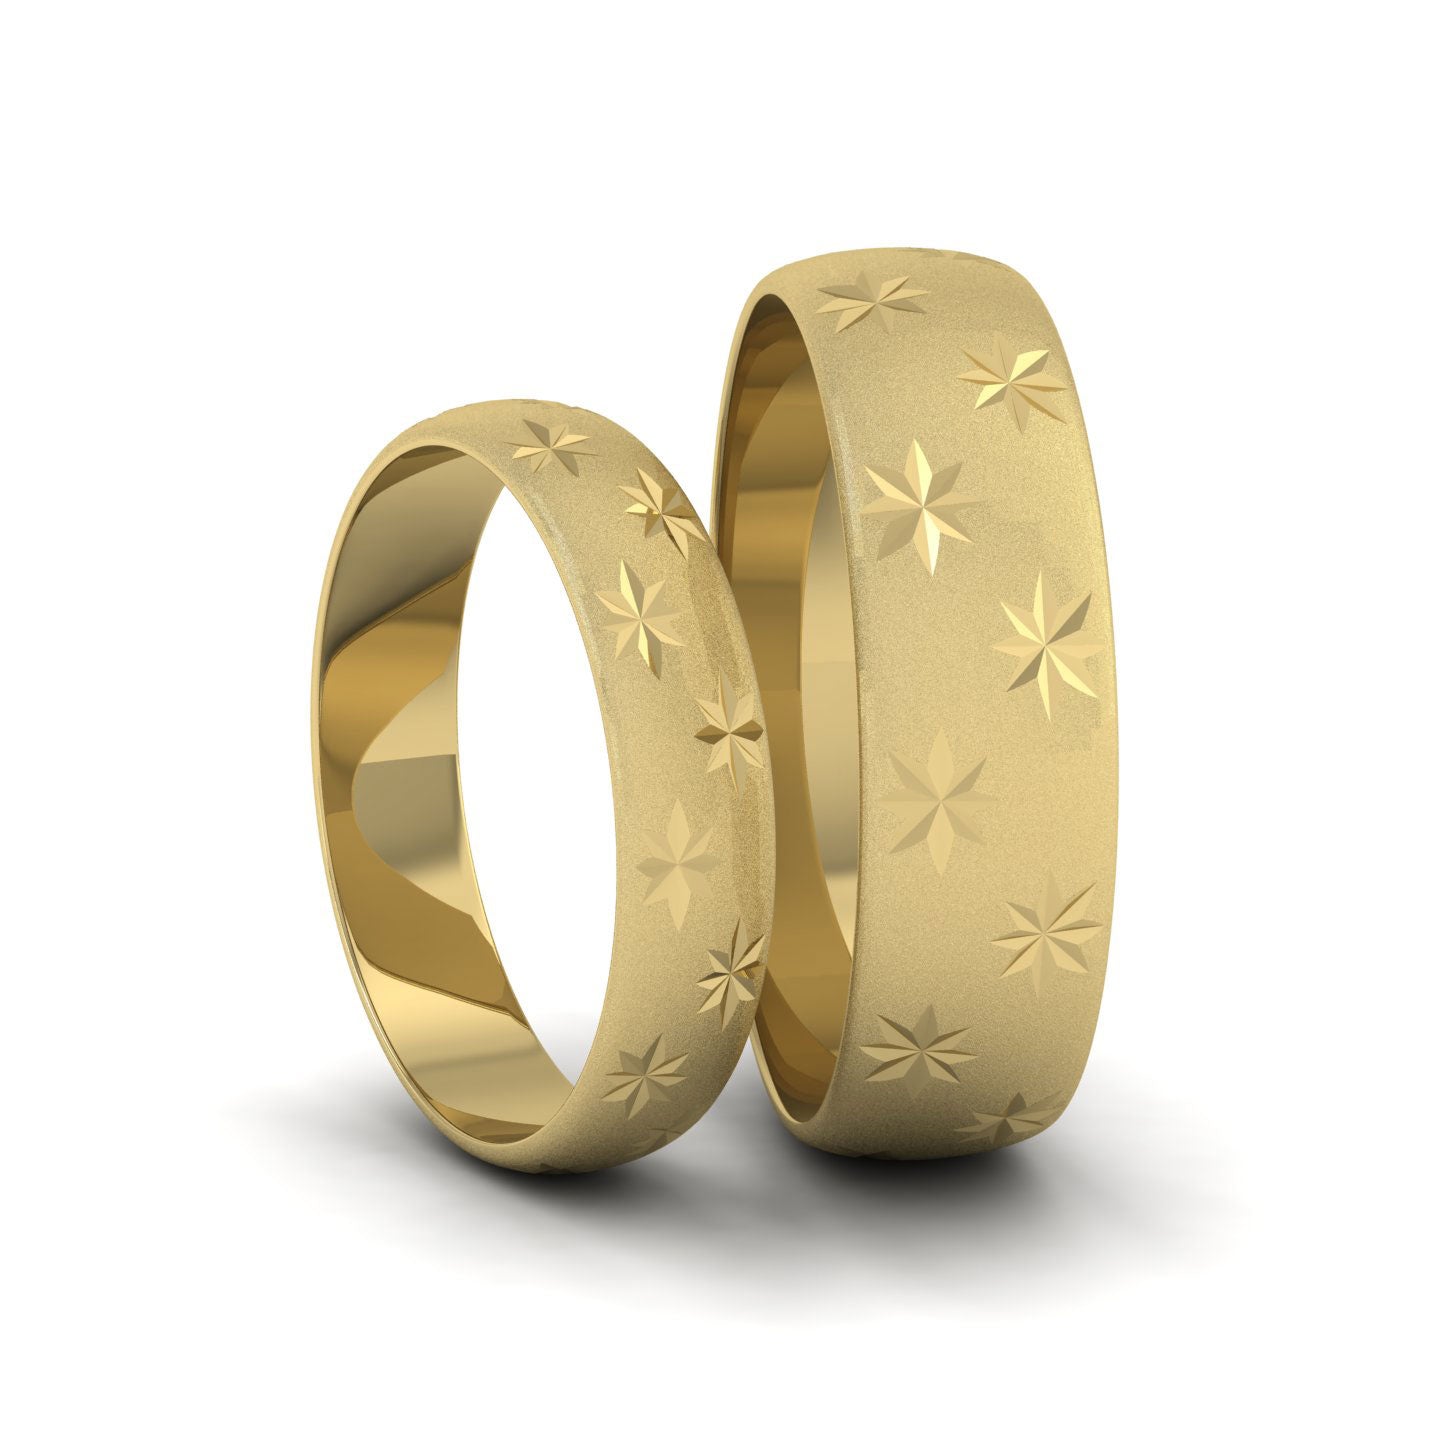 Star Patterned 18ct Yellow Gold 6mm Wedding Ring